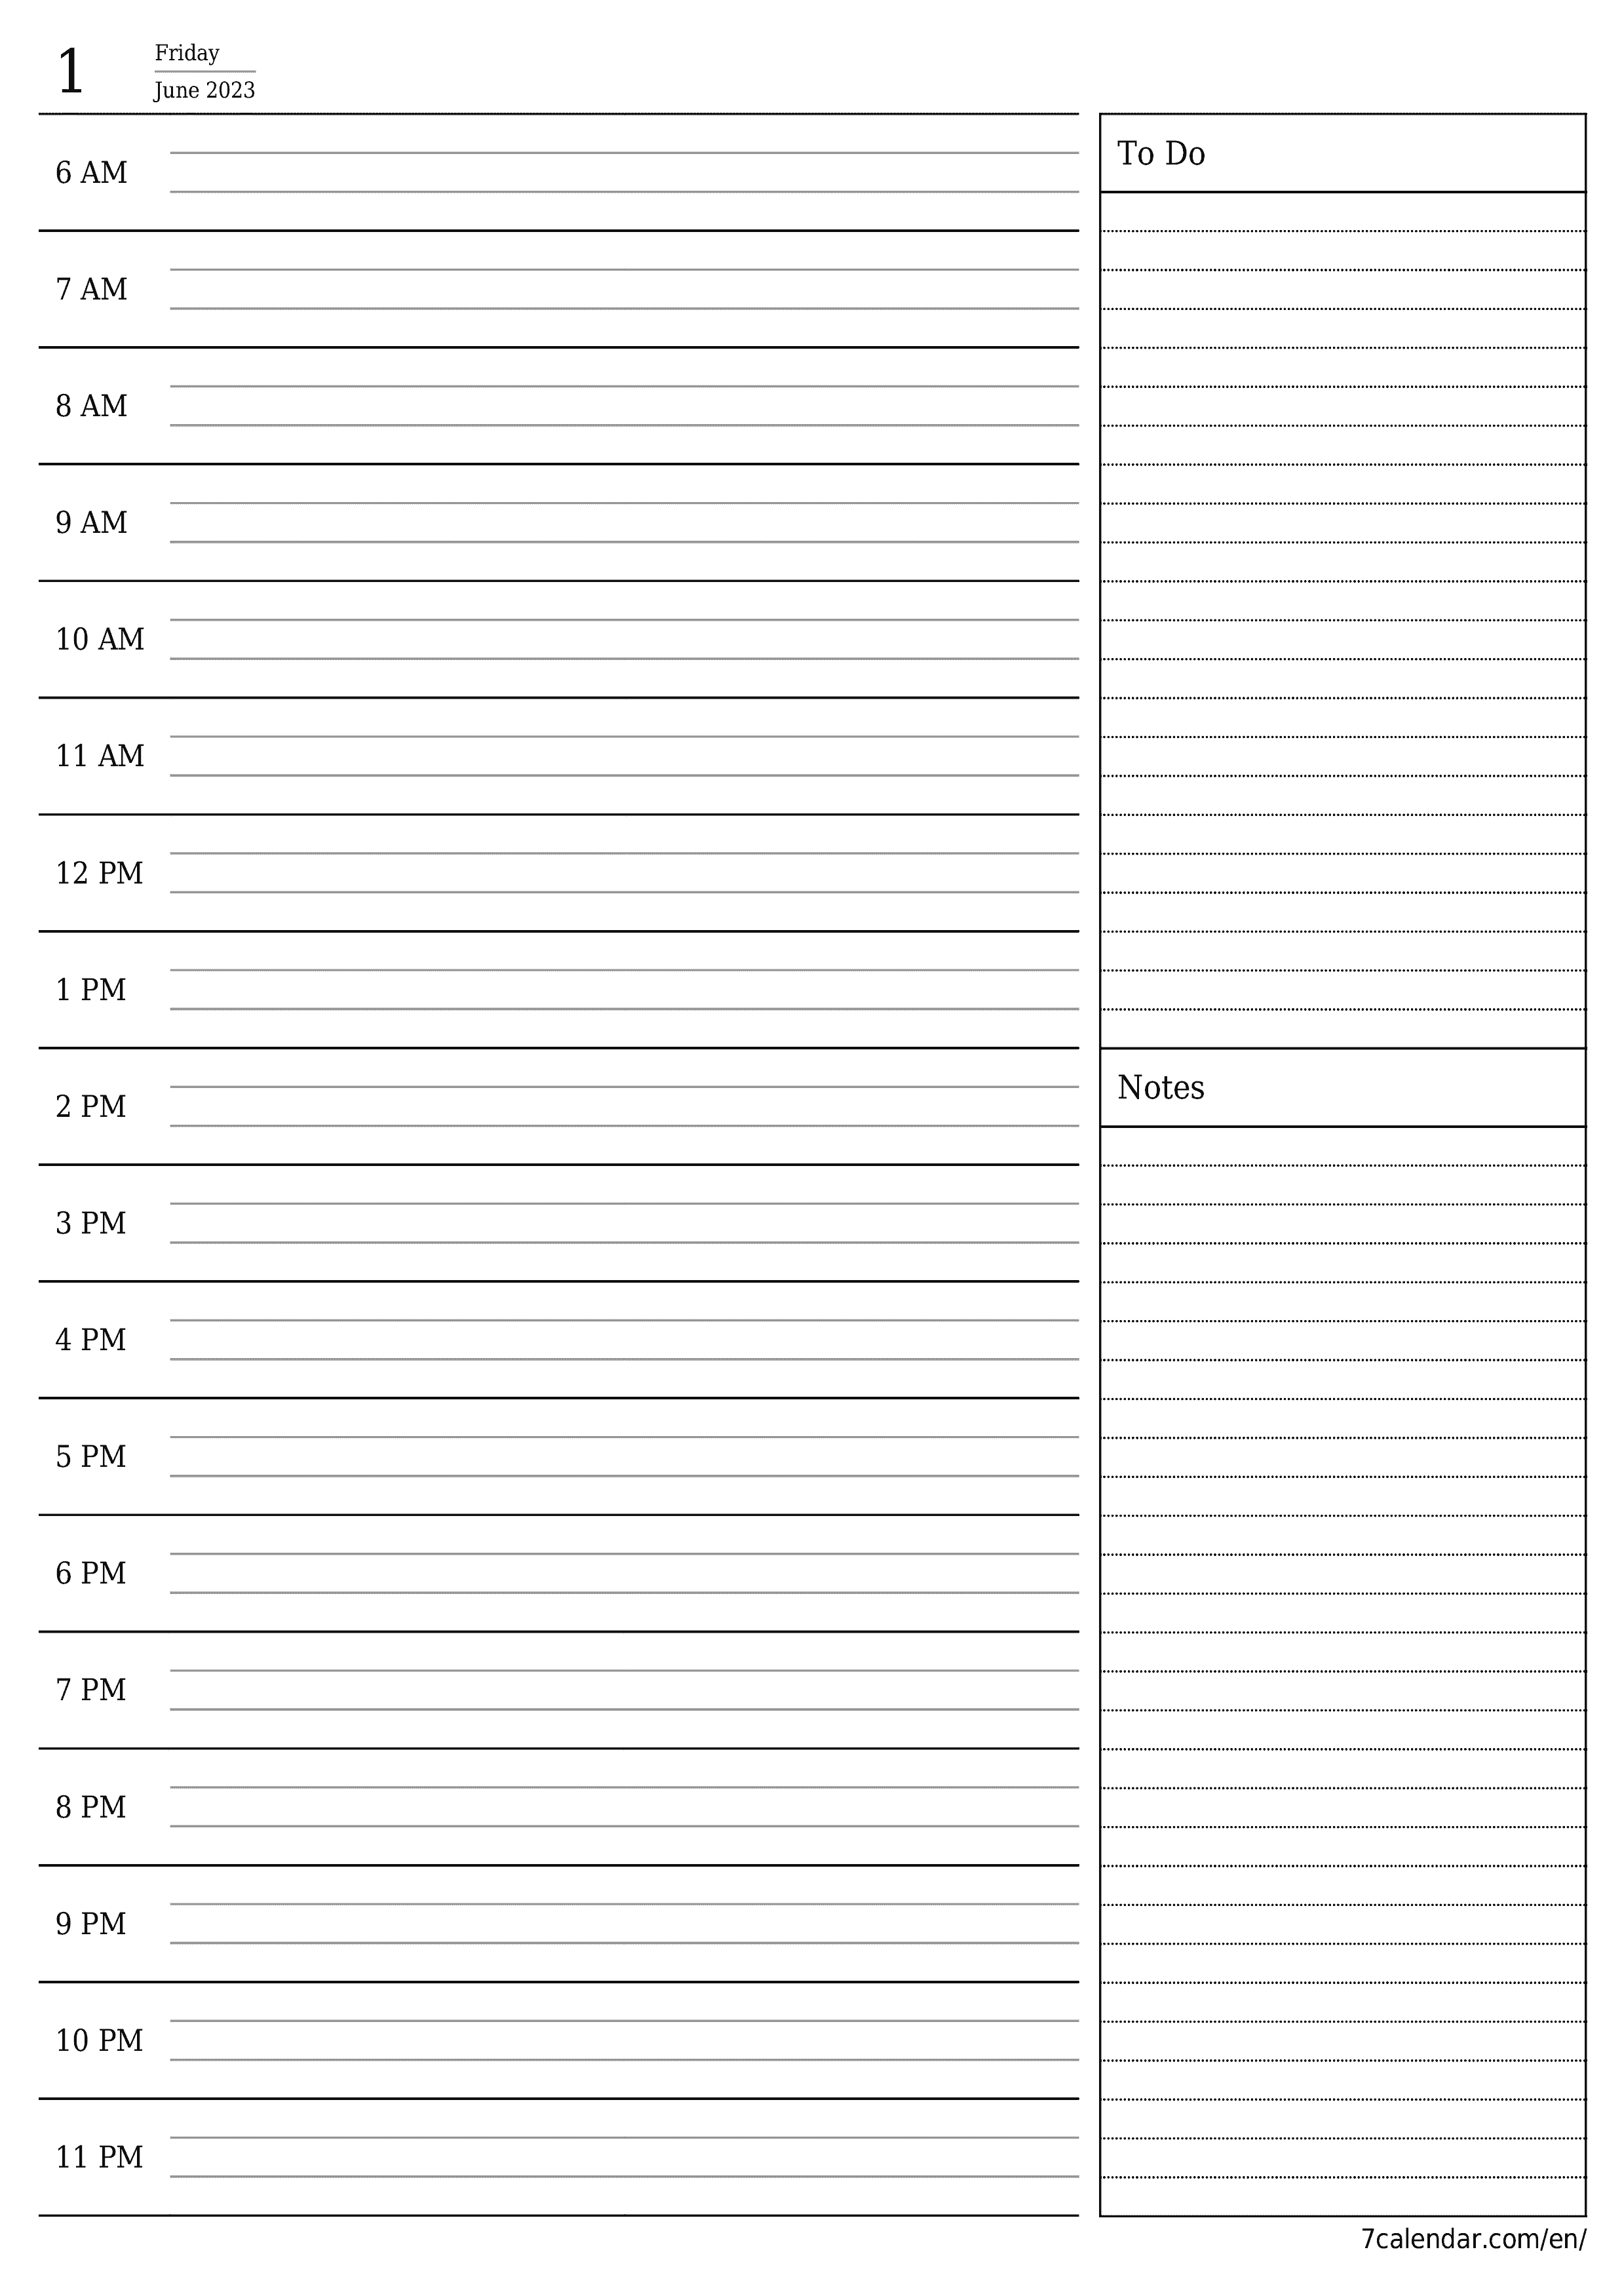 Blank daily printable calendar and planner for day June 2023 with notes, save and print to PDF PNG English - 7calendar.com